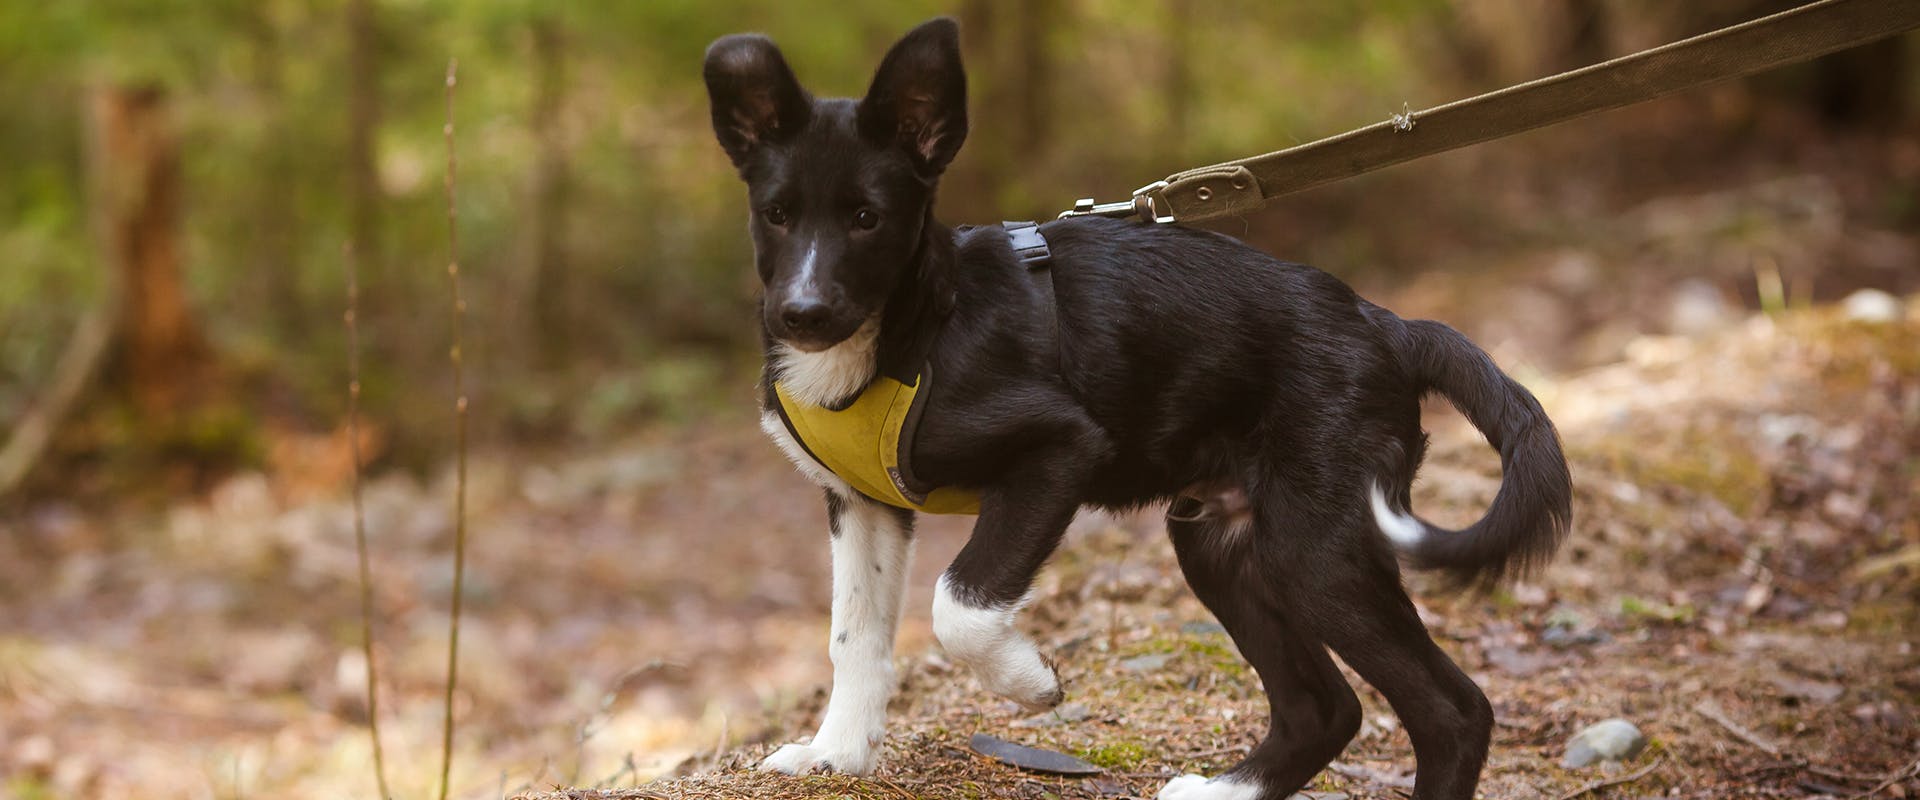 A small black dog walking through a forest, wearing a yellow and black small dog harness